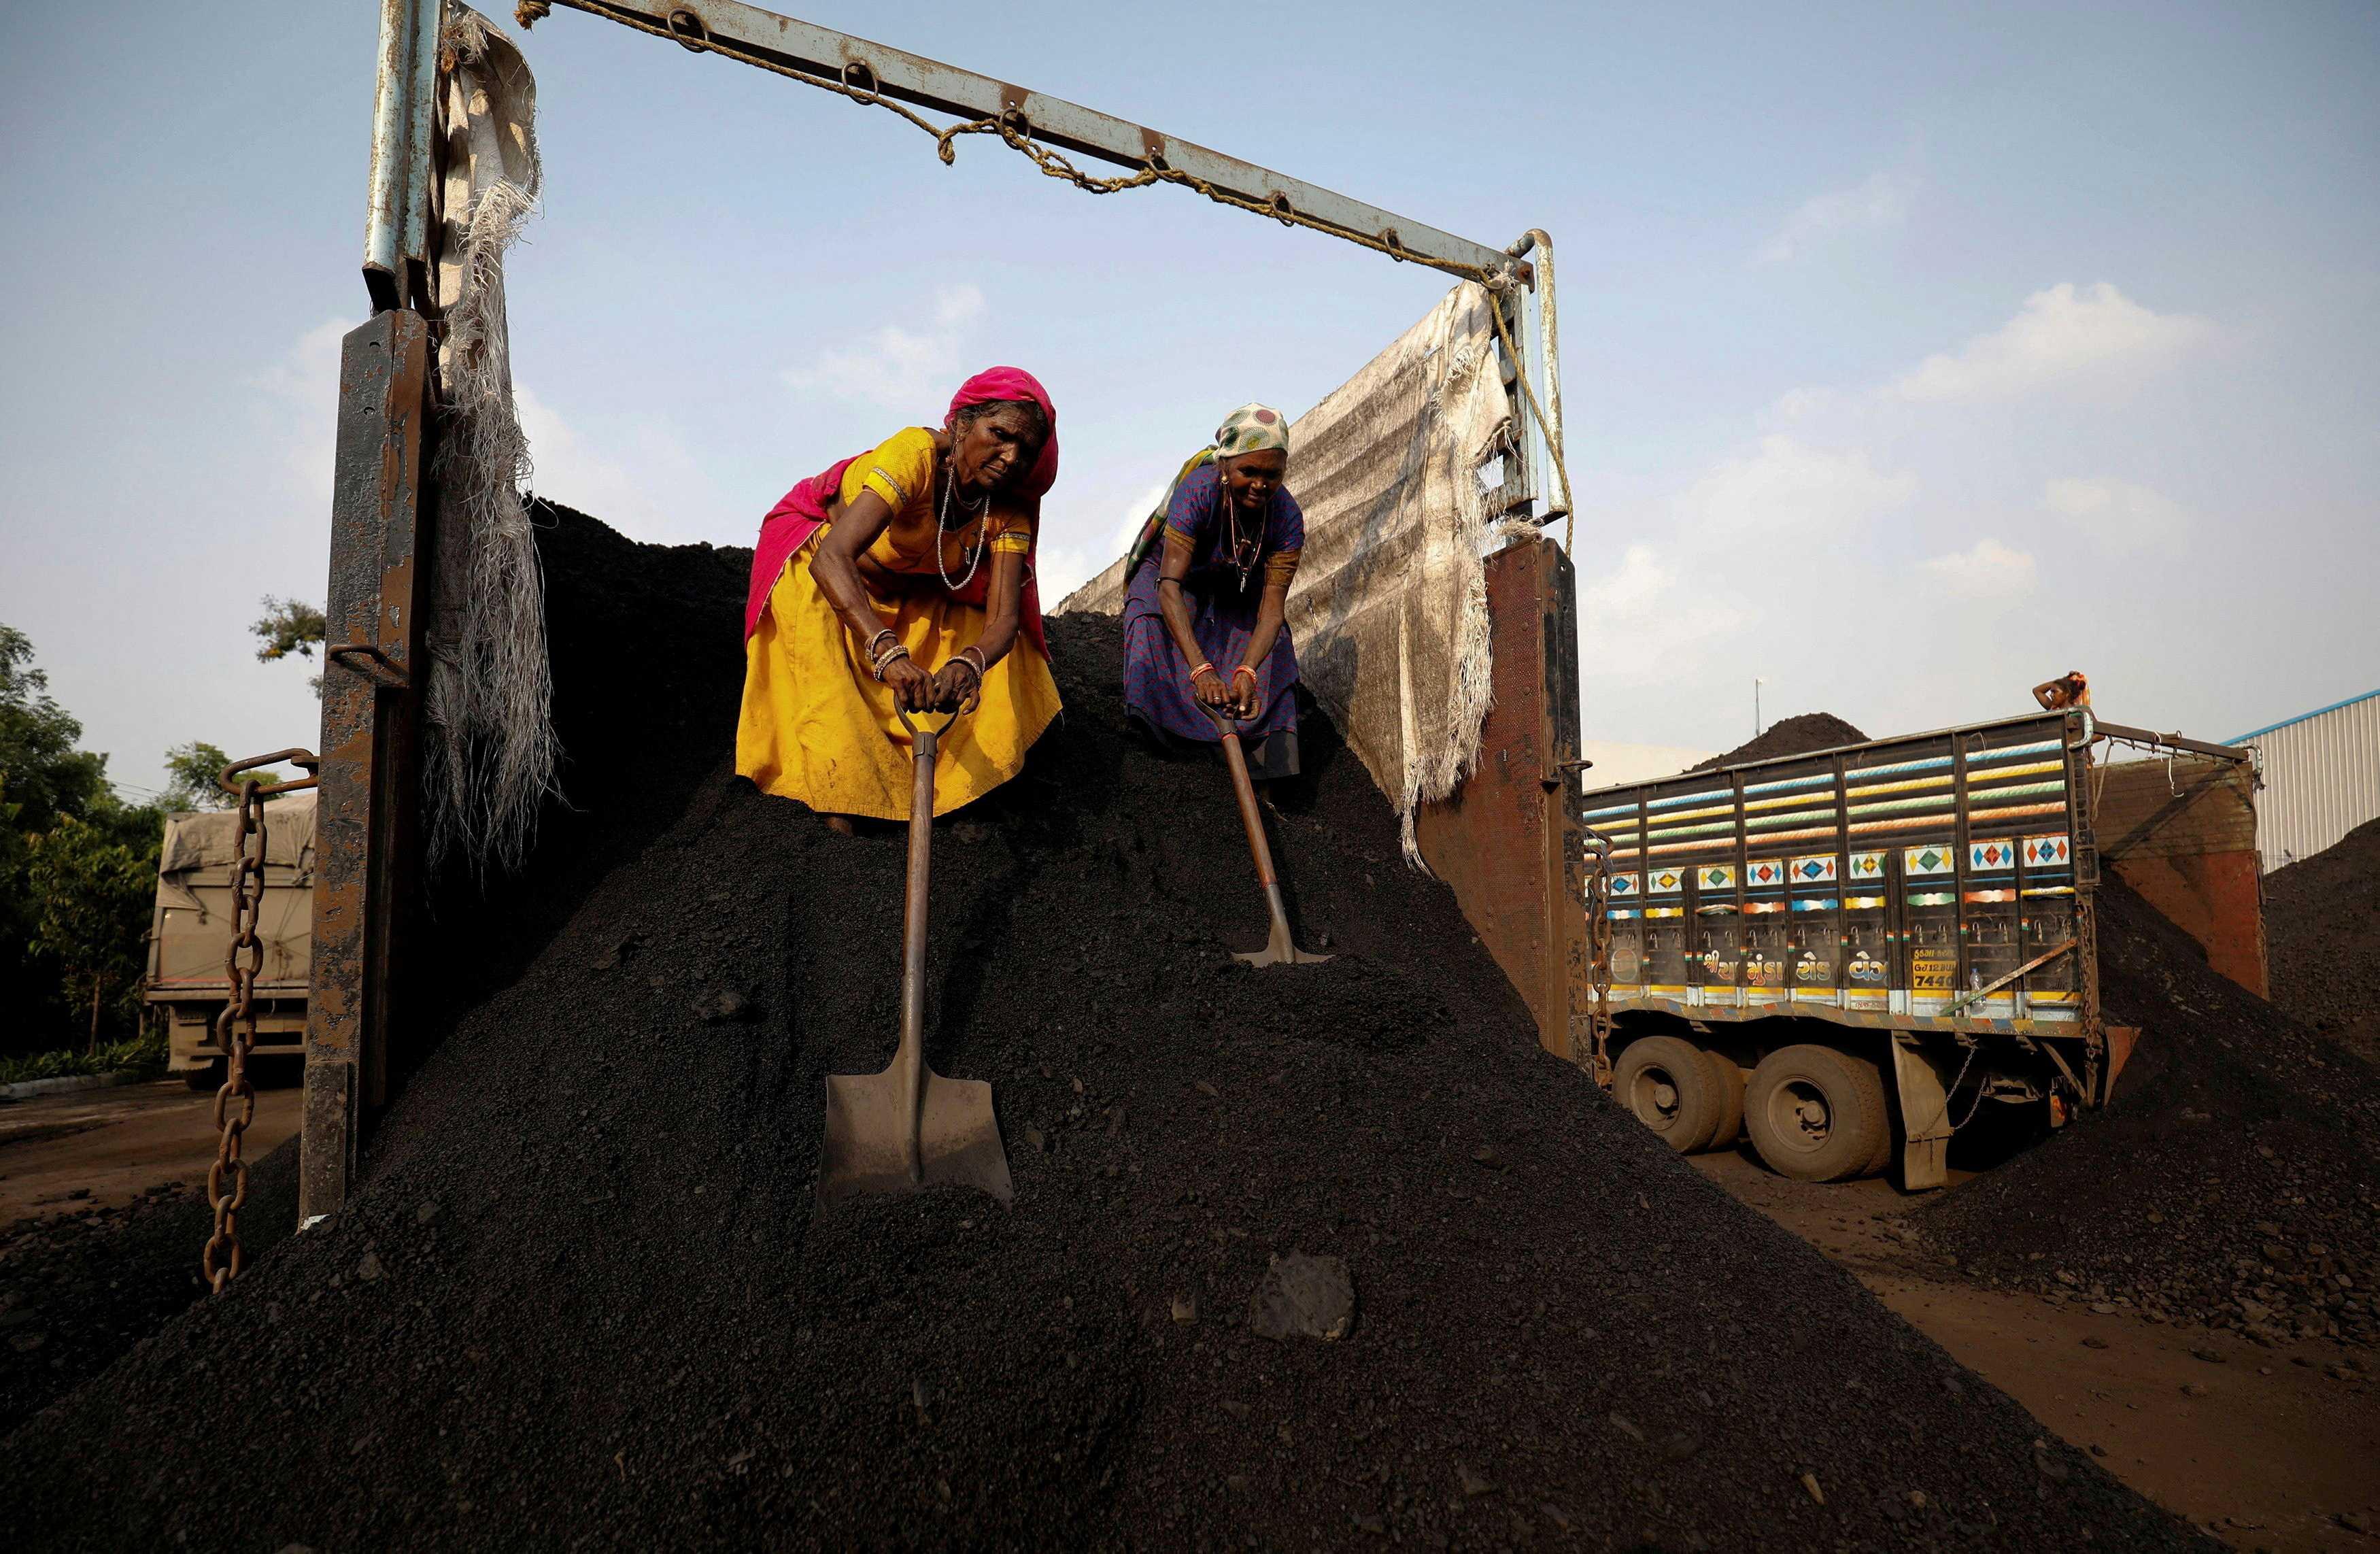 Workers unload coal from a supply truck at a yard on the outskirts of Ahmedabad, India, Oct 12, 2021. Photo: Reuters